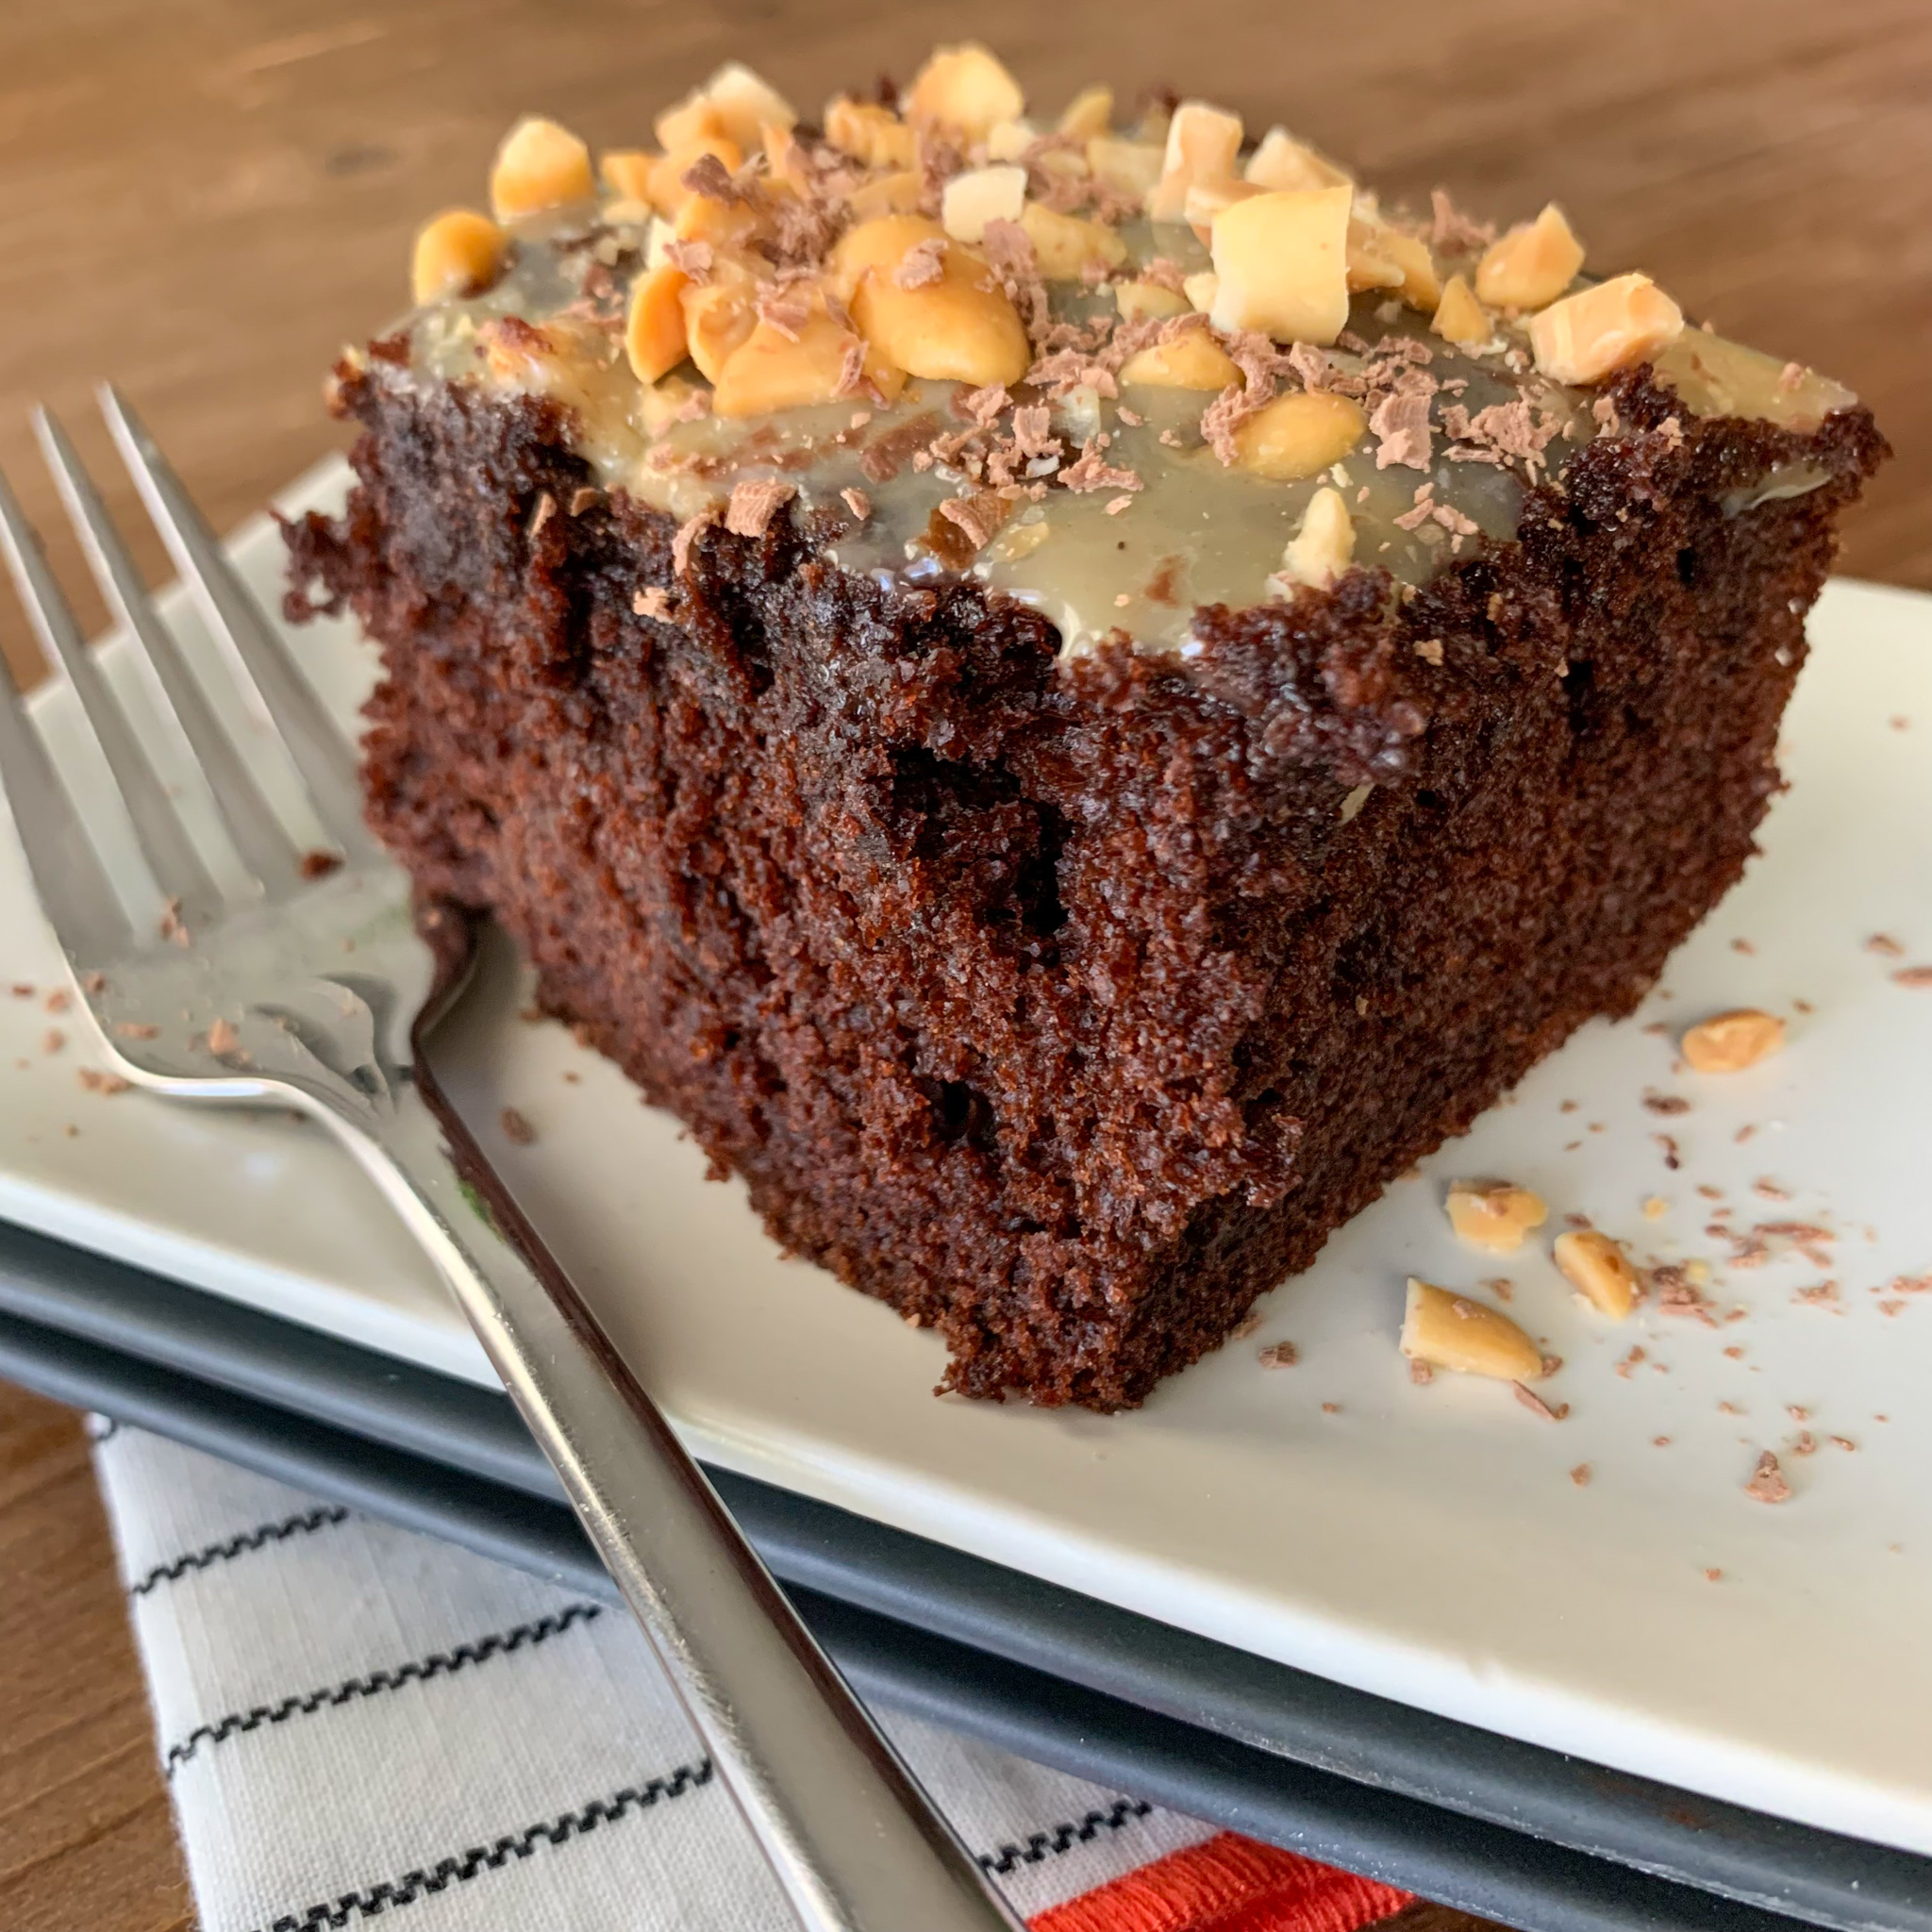 Easy Peanut Butter Chocolate Cake with Condensed Milk Glaze